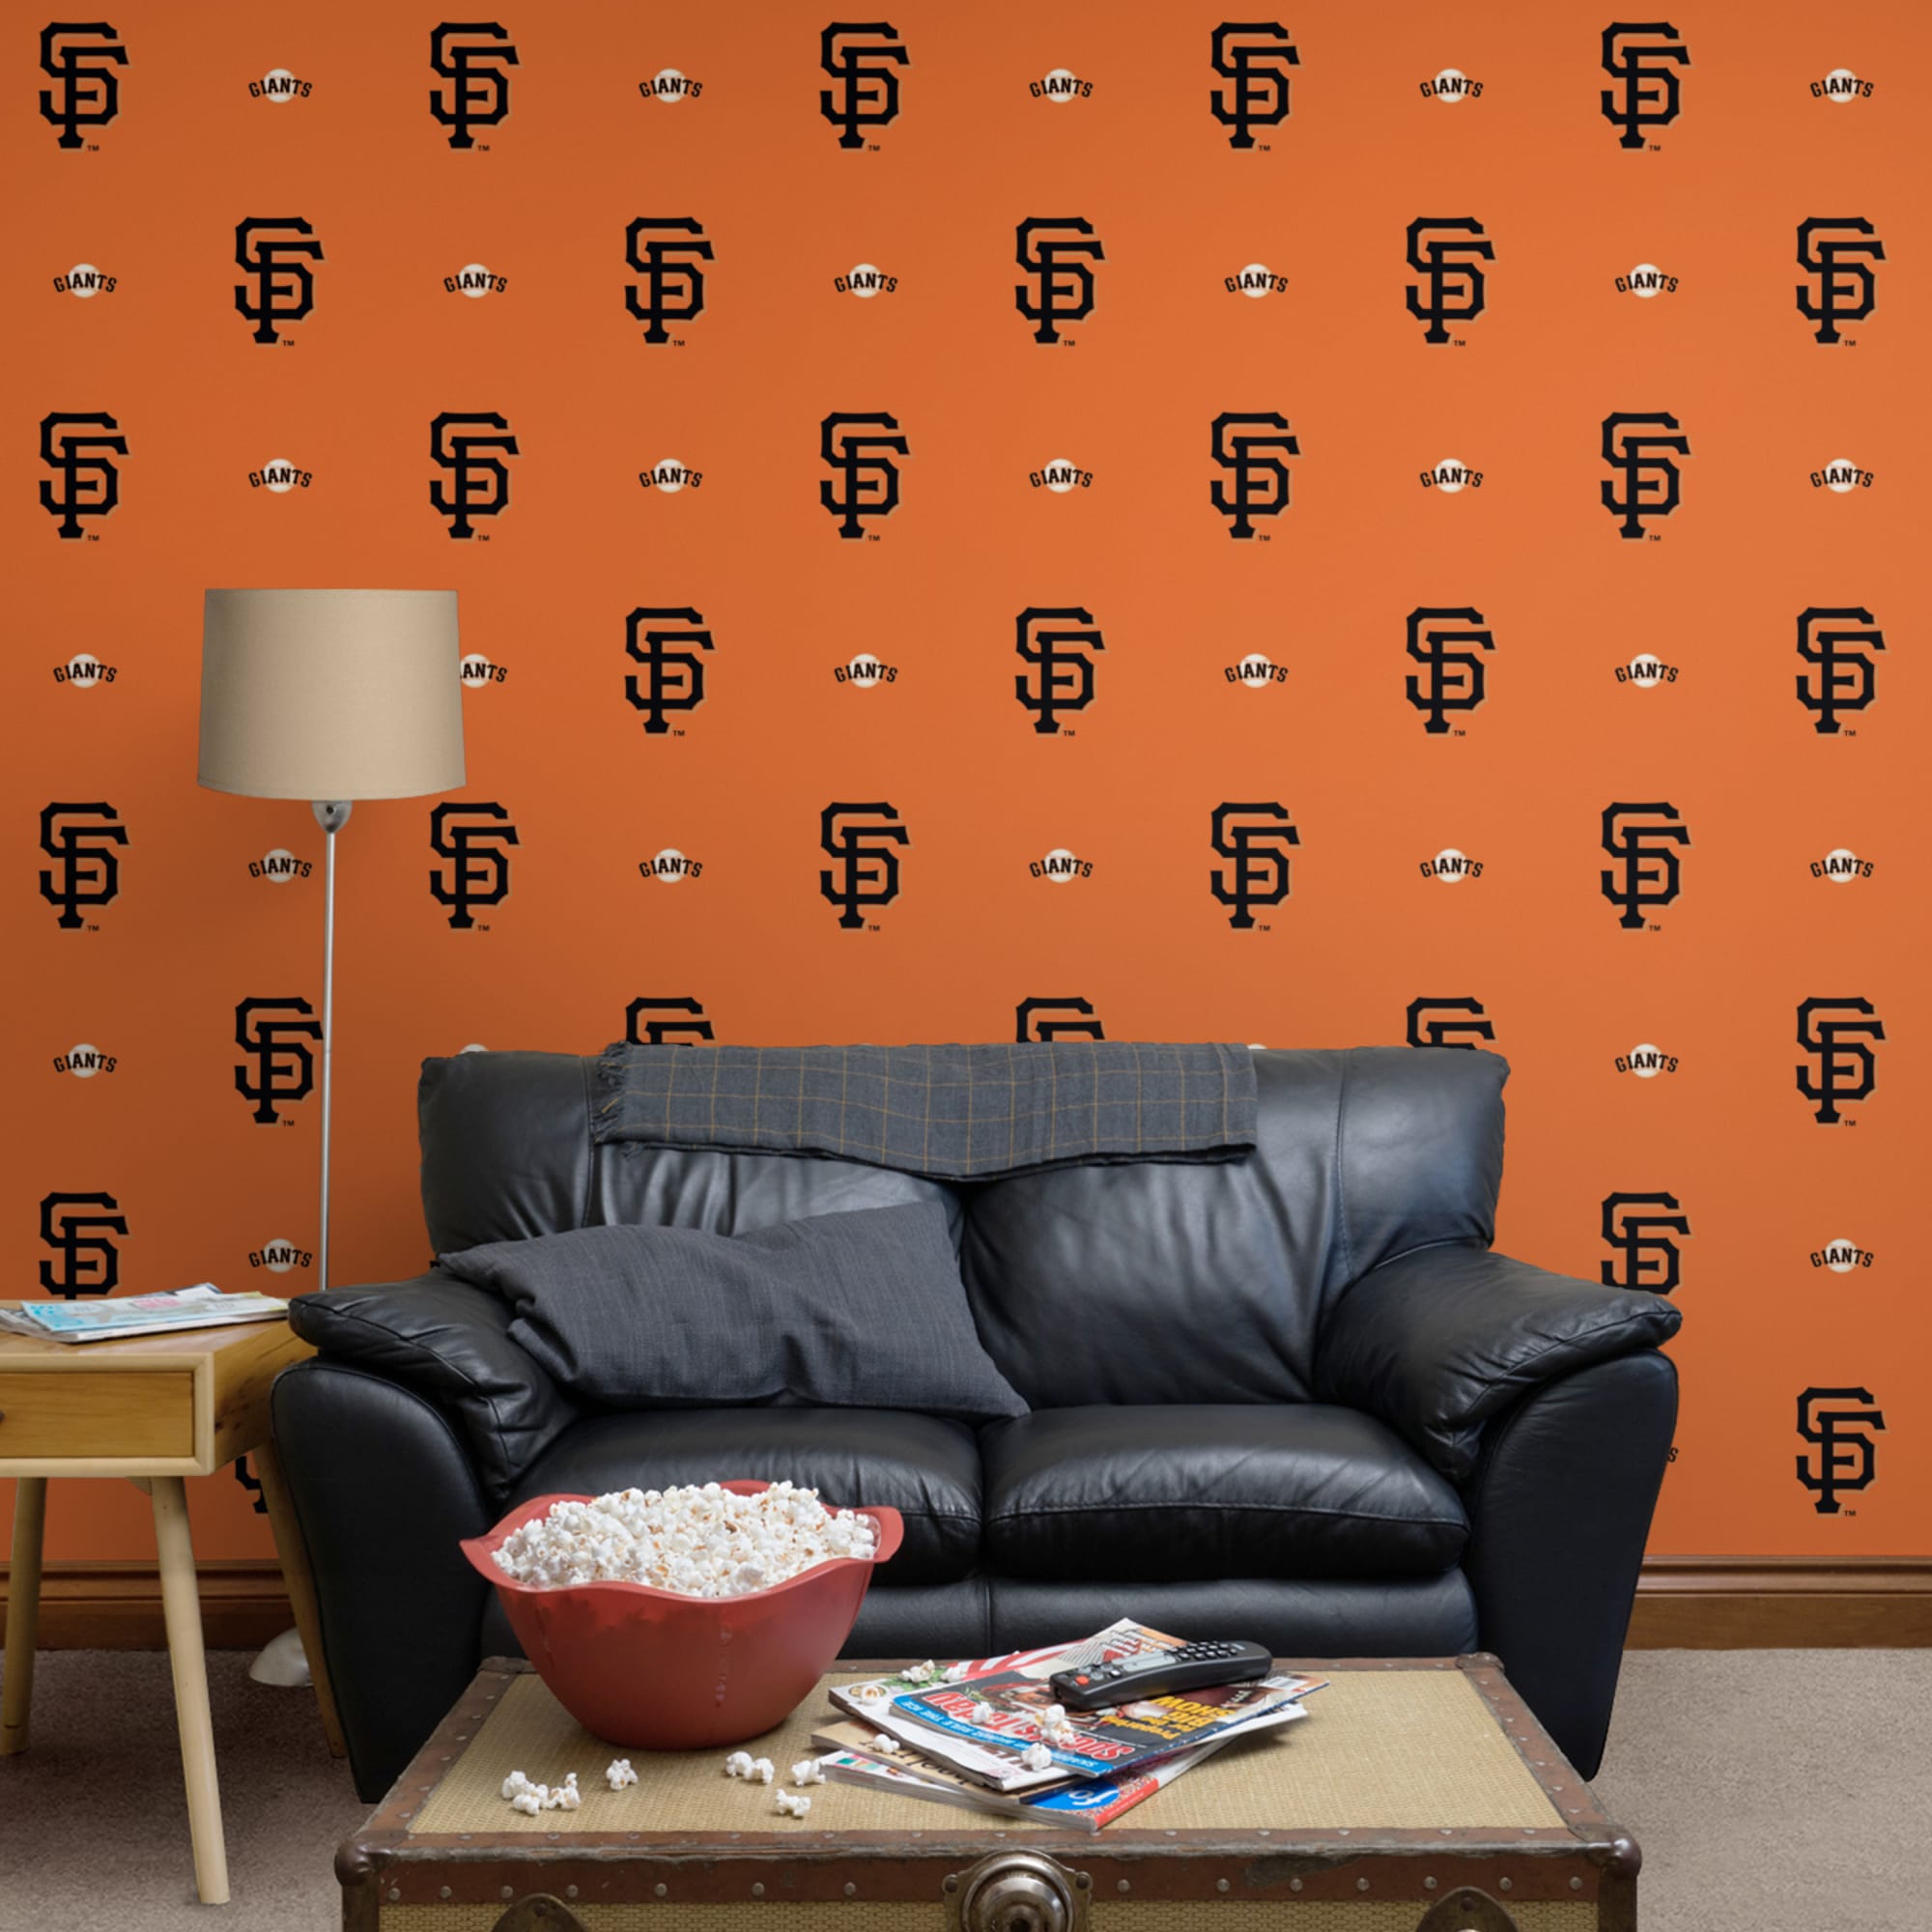 San Francisco Giants: Logo Pattern - Officially Licensed Removable Wallpaper 12" x 12" Sample by Fathead | 100% Vinyl